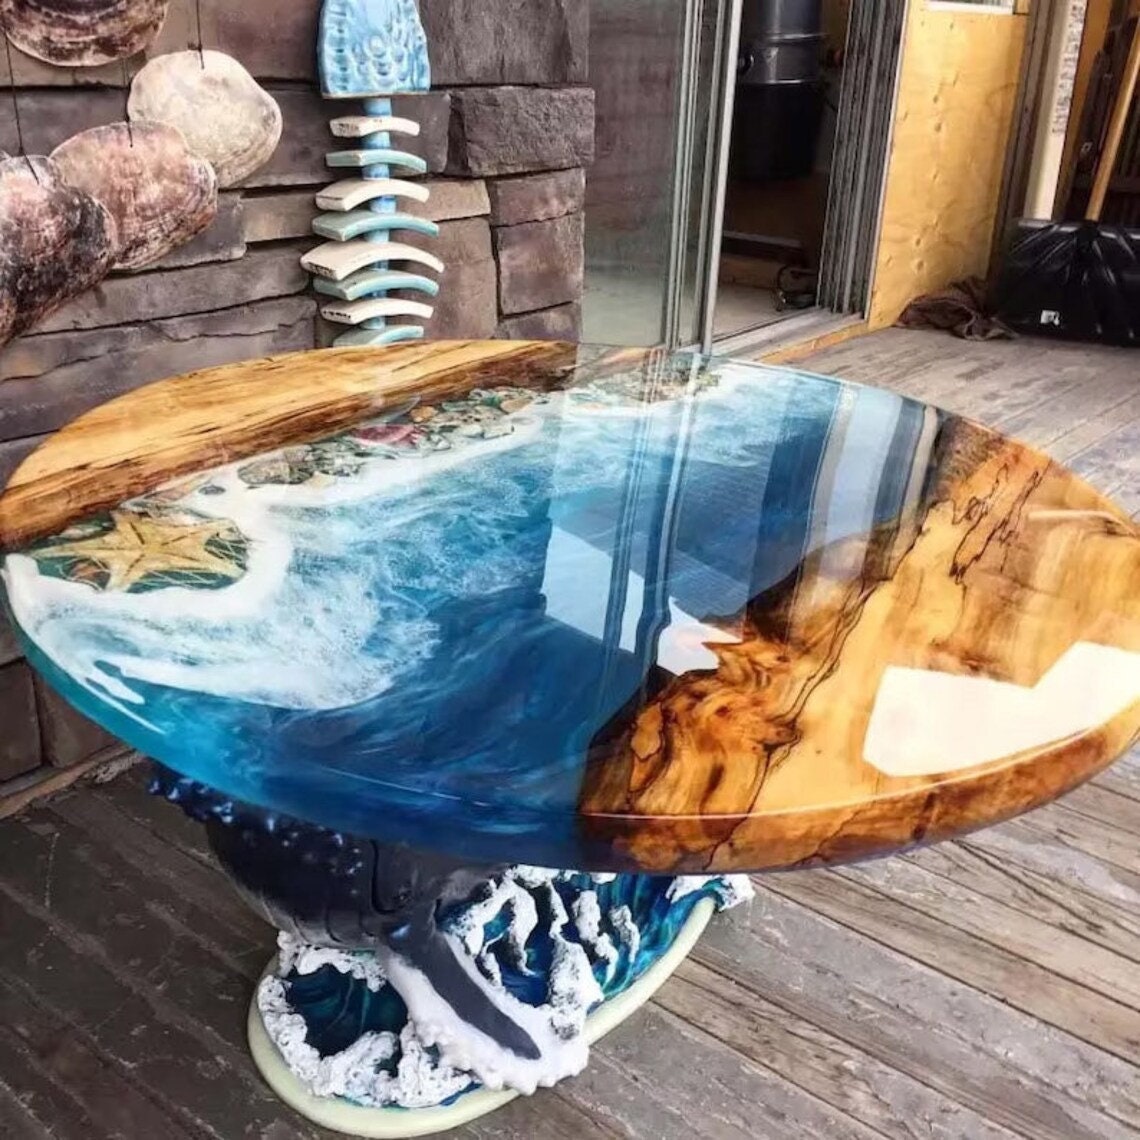 Green Ocean Resin Epoxy Dining Table, Resin Coffee Center Side